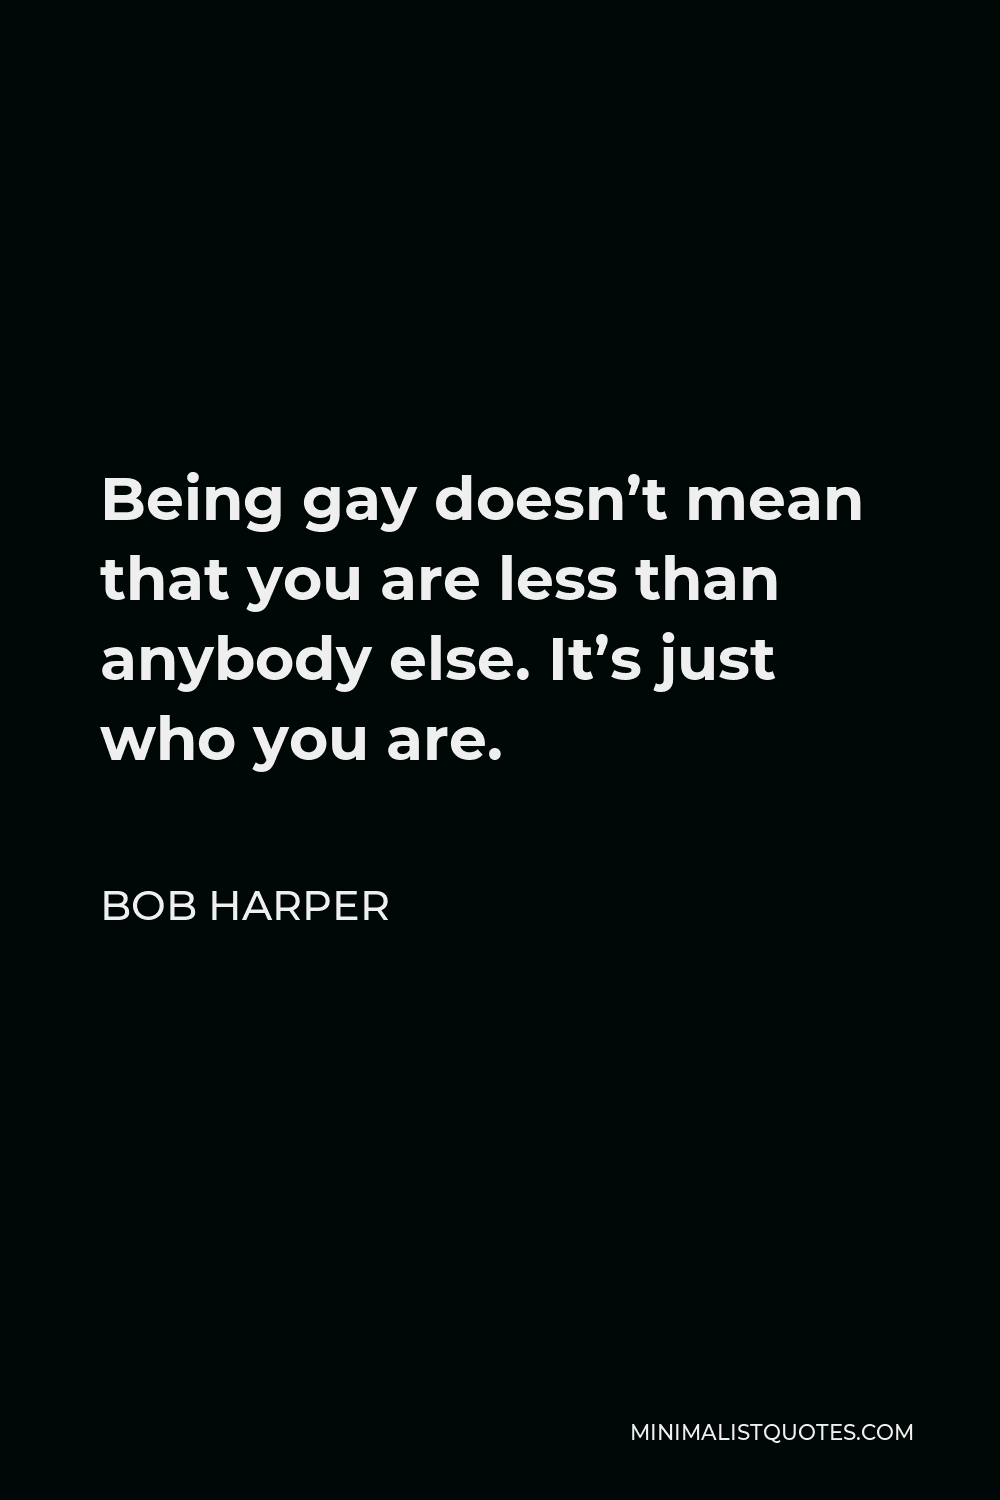 Bob Harper Quote - Being gay doesn’t mean that you are less than anybody else. It’s just who you are.